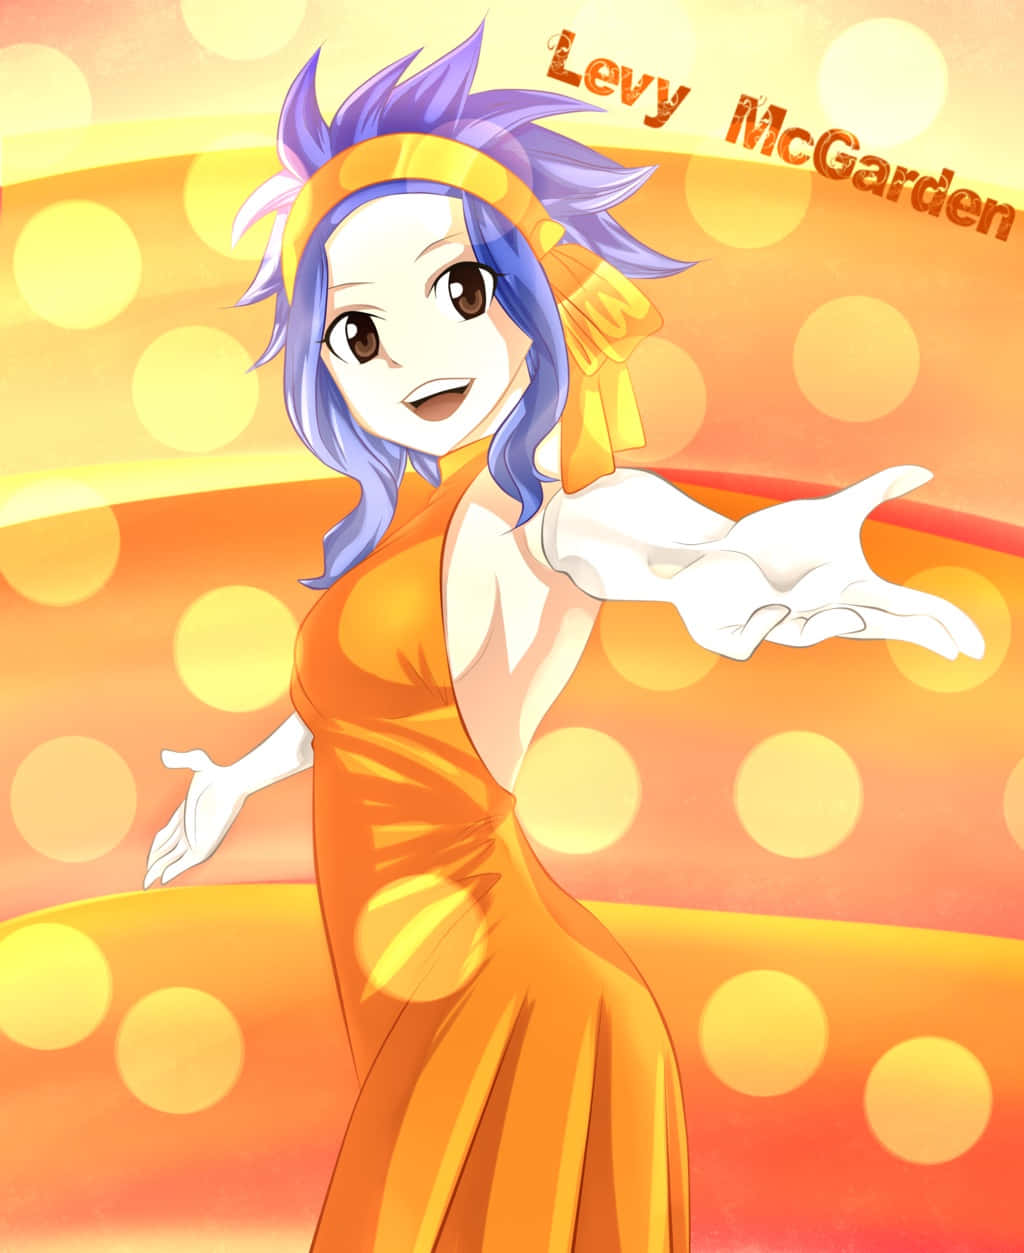 Levy McGarden - Fairy Tail's Skilled Mage Wallpaper